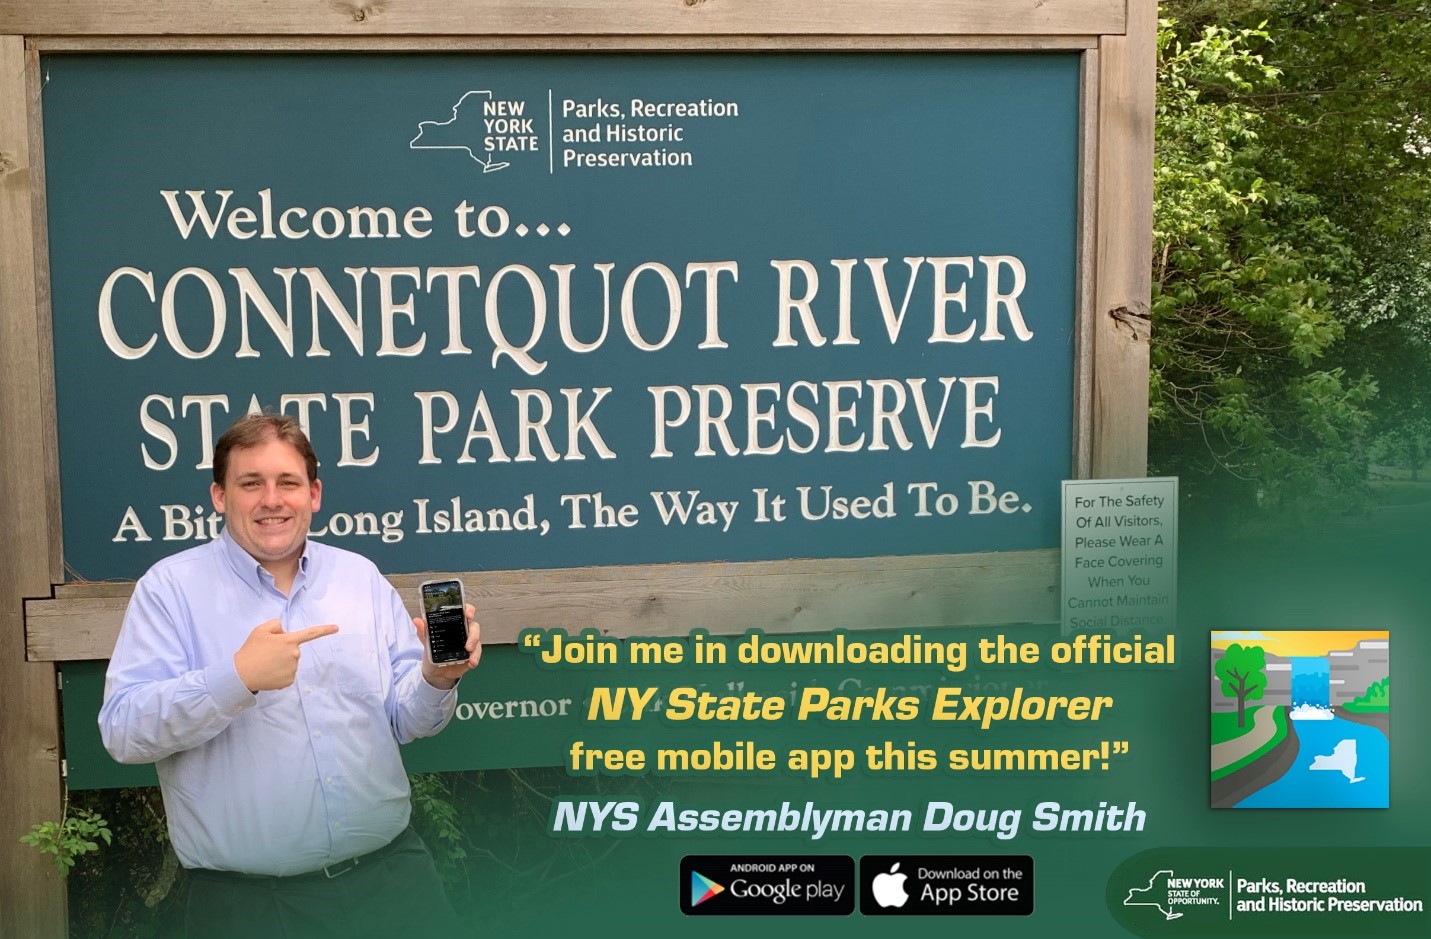 Smith A New App for Exploring State Parks is Available